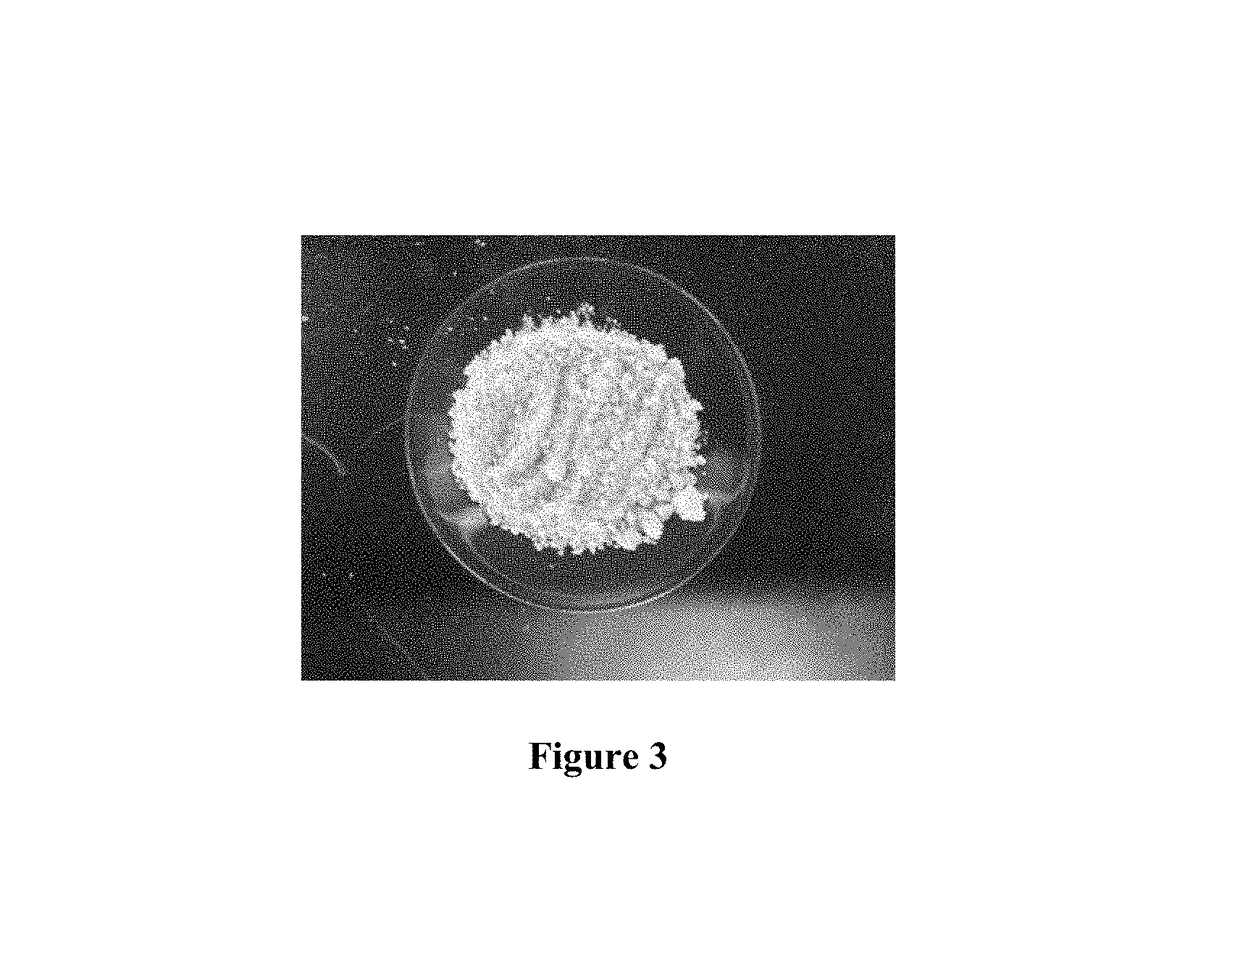 Use of marine algae for co-producing alkenones, alkenone derivatives, and co-products